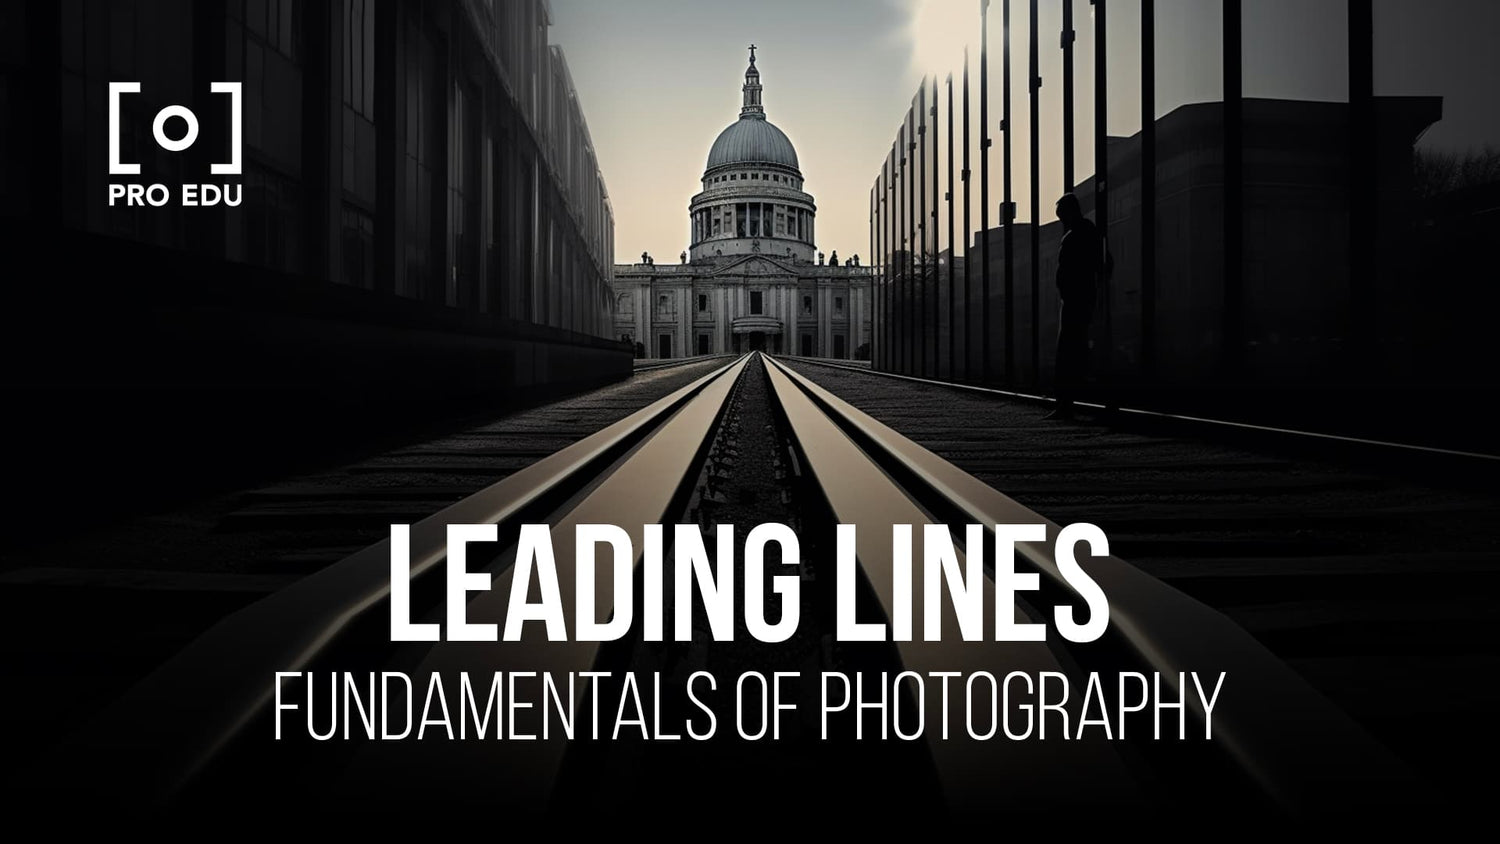 Guiding the viewer's eye with leading lines in photography for impactful composition